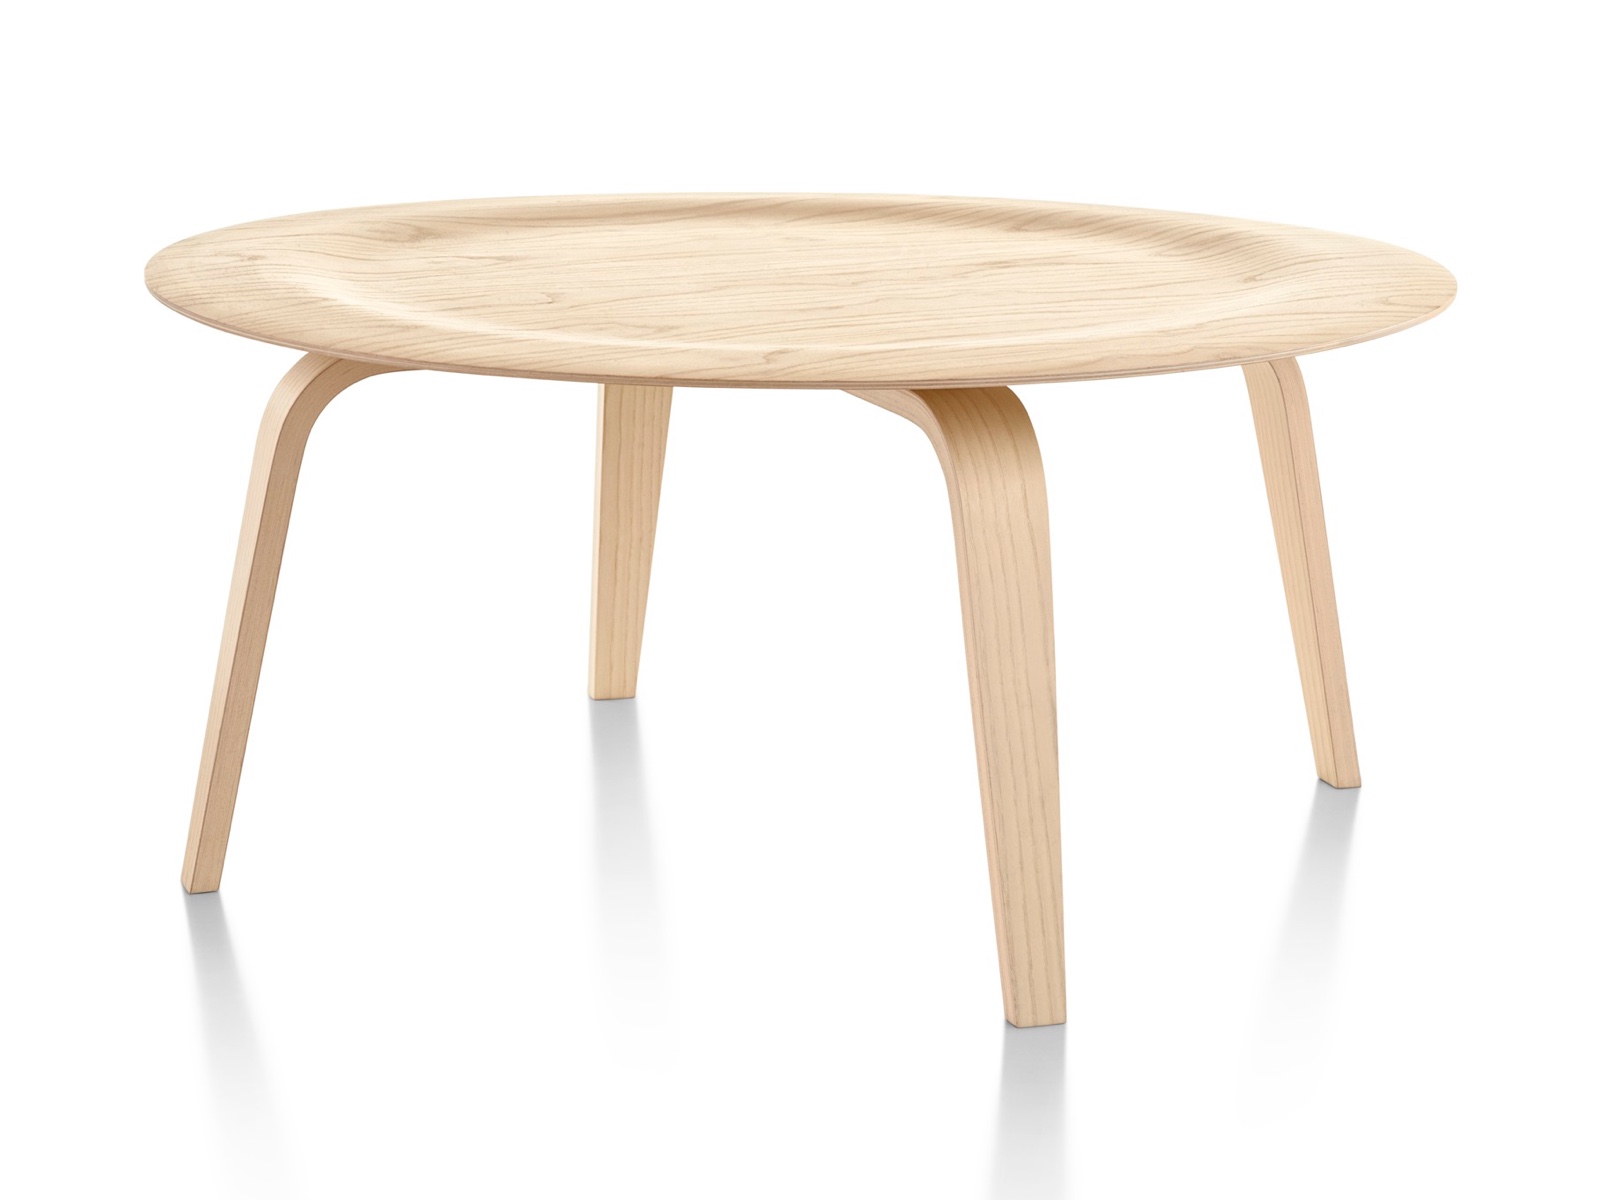 A round Eames Molded Plywood Coffee Table with wood legs and an indented top in a light finish. 